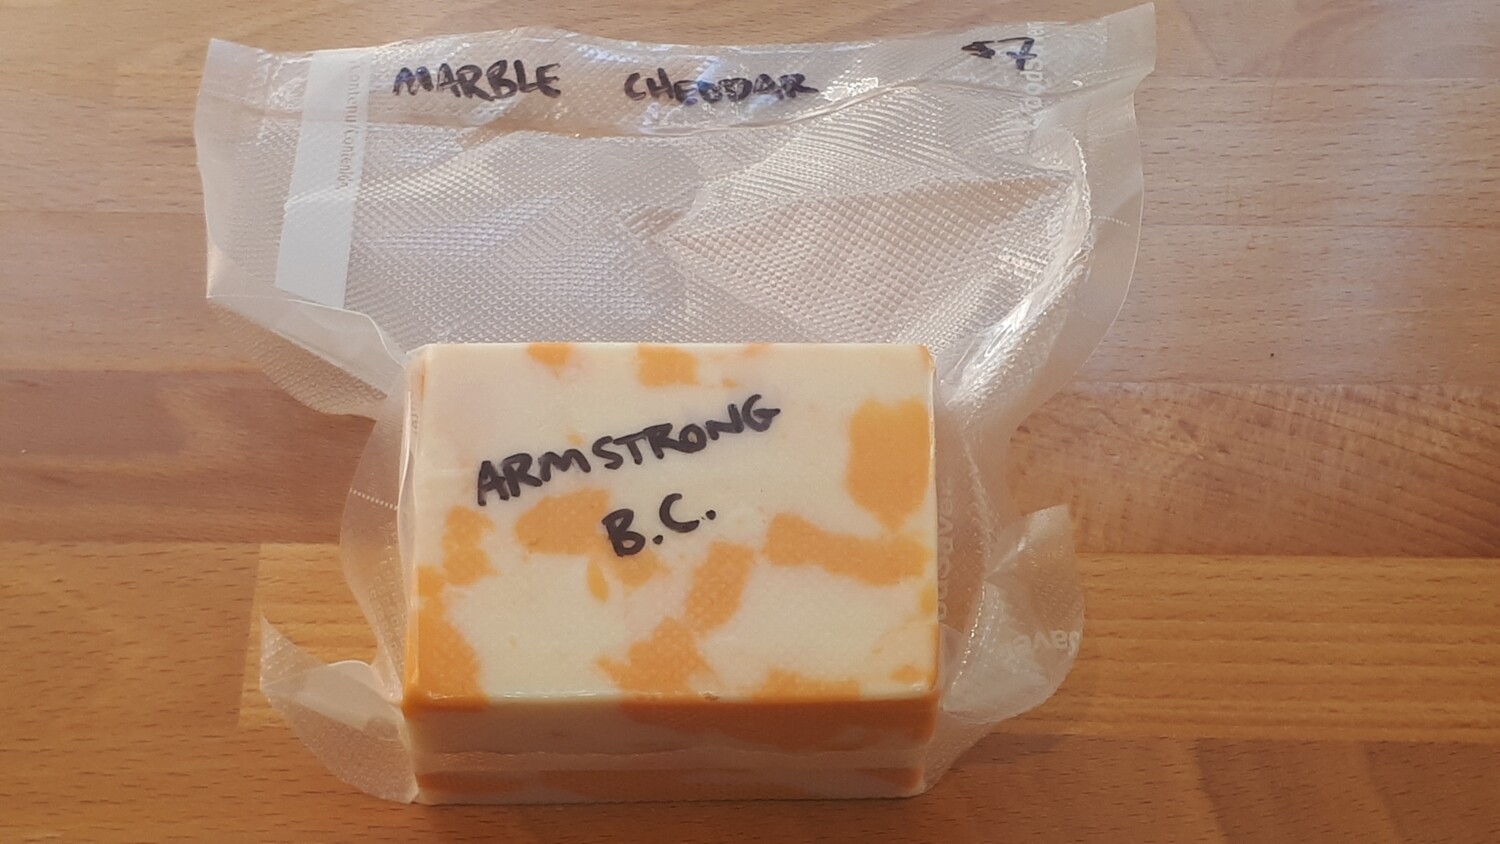 Armstrong Marble Cheddar